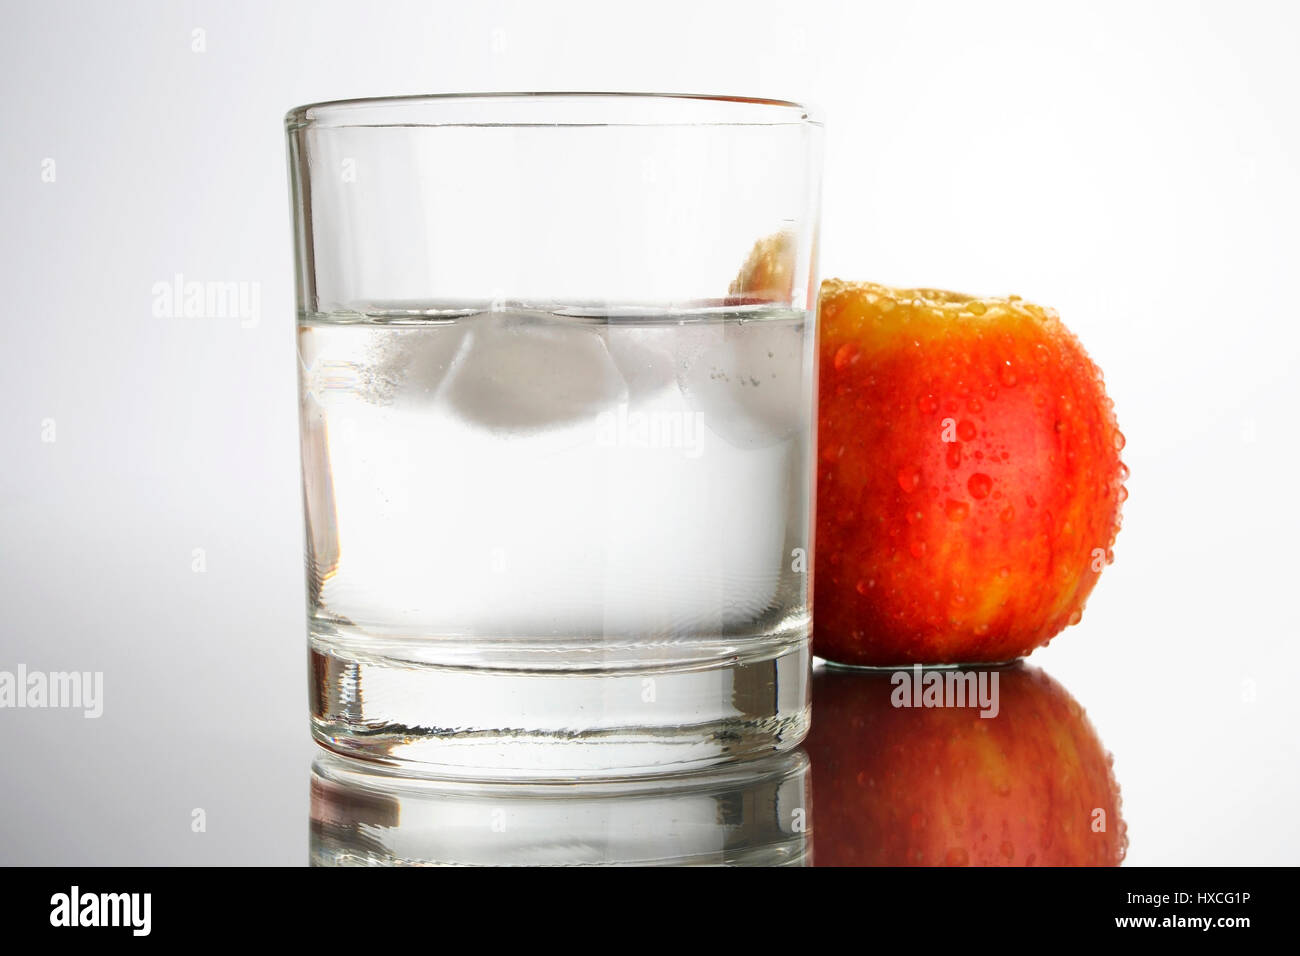 Glass of water with apple, Glas Wasser mit Apfel Stock Photo